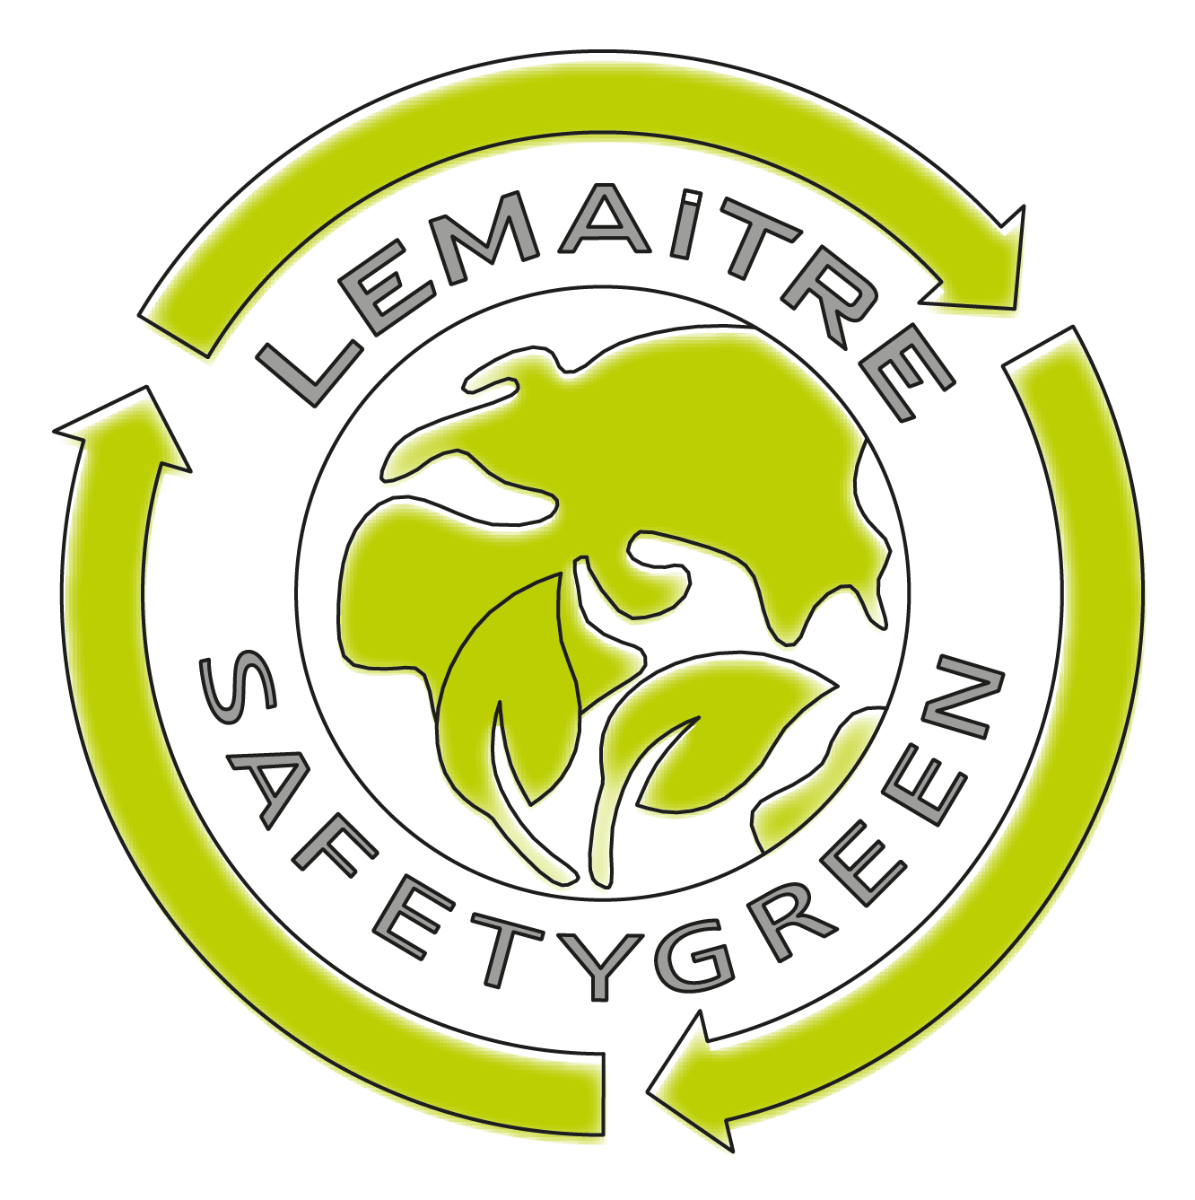 Lemaitre Safety Green